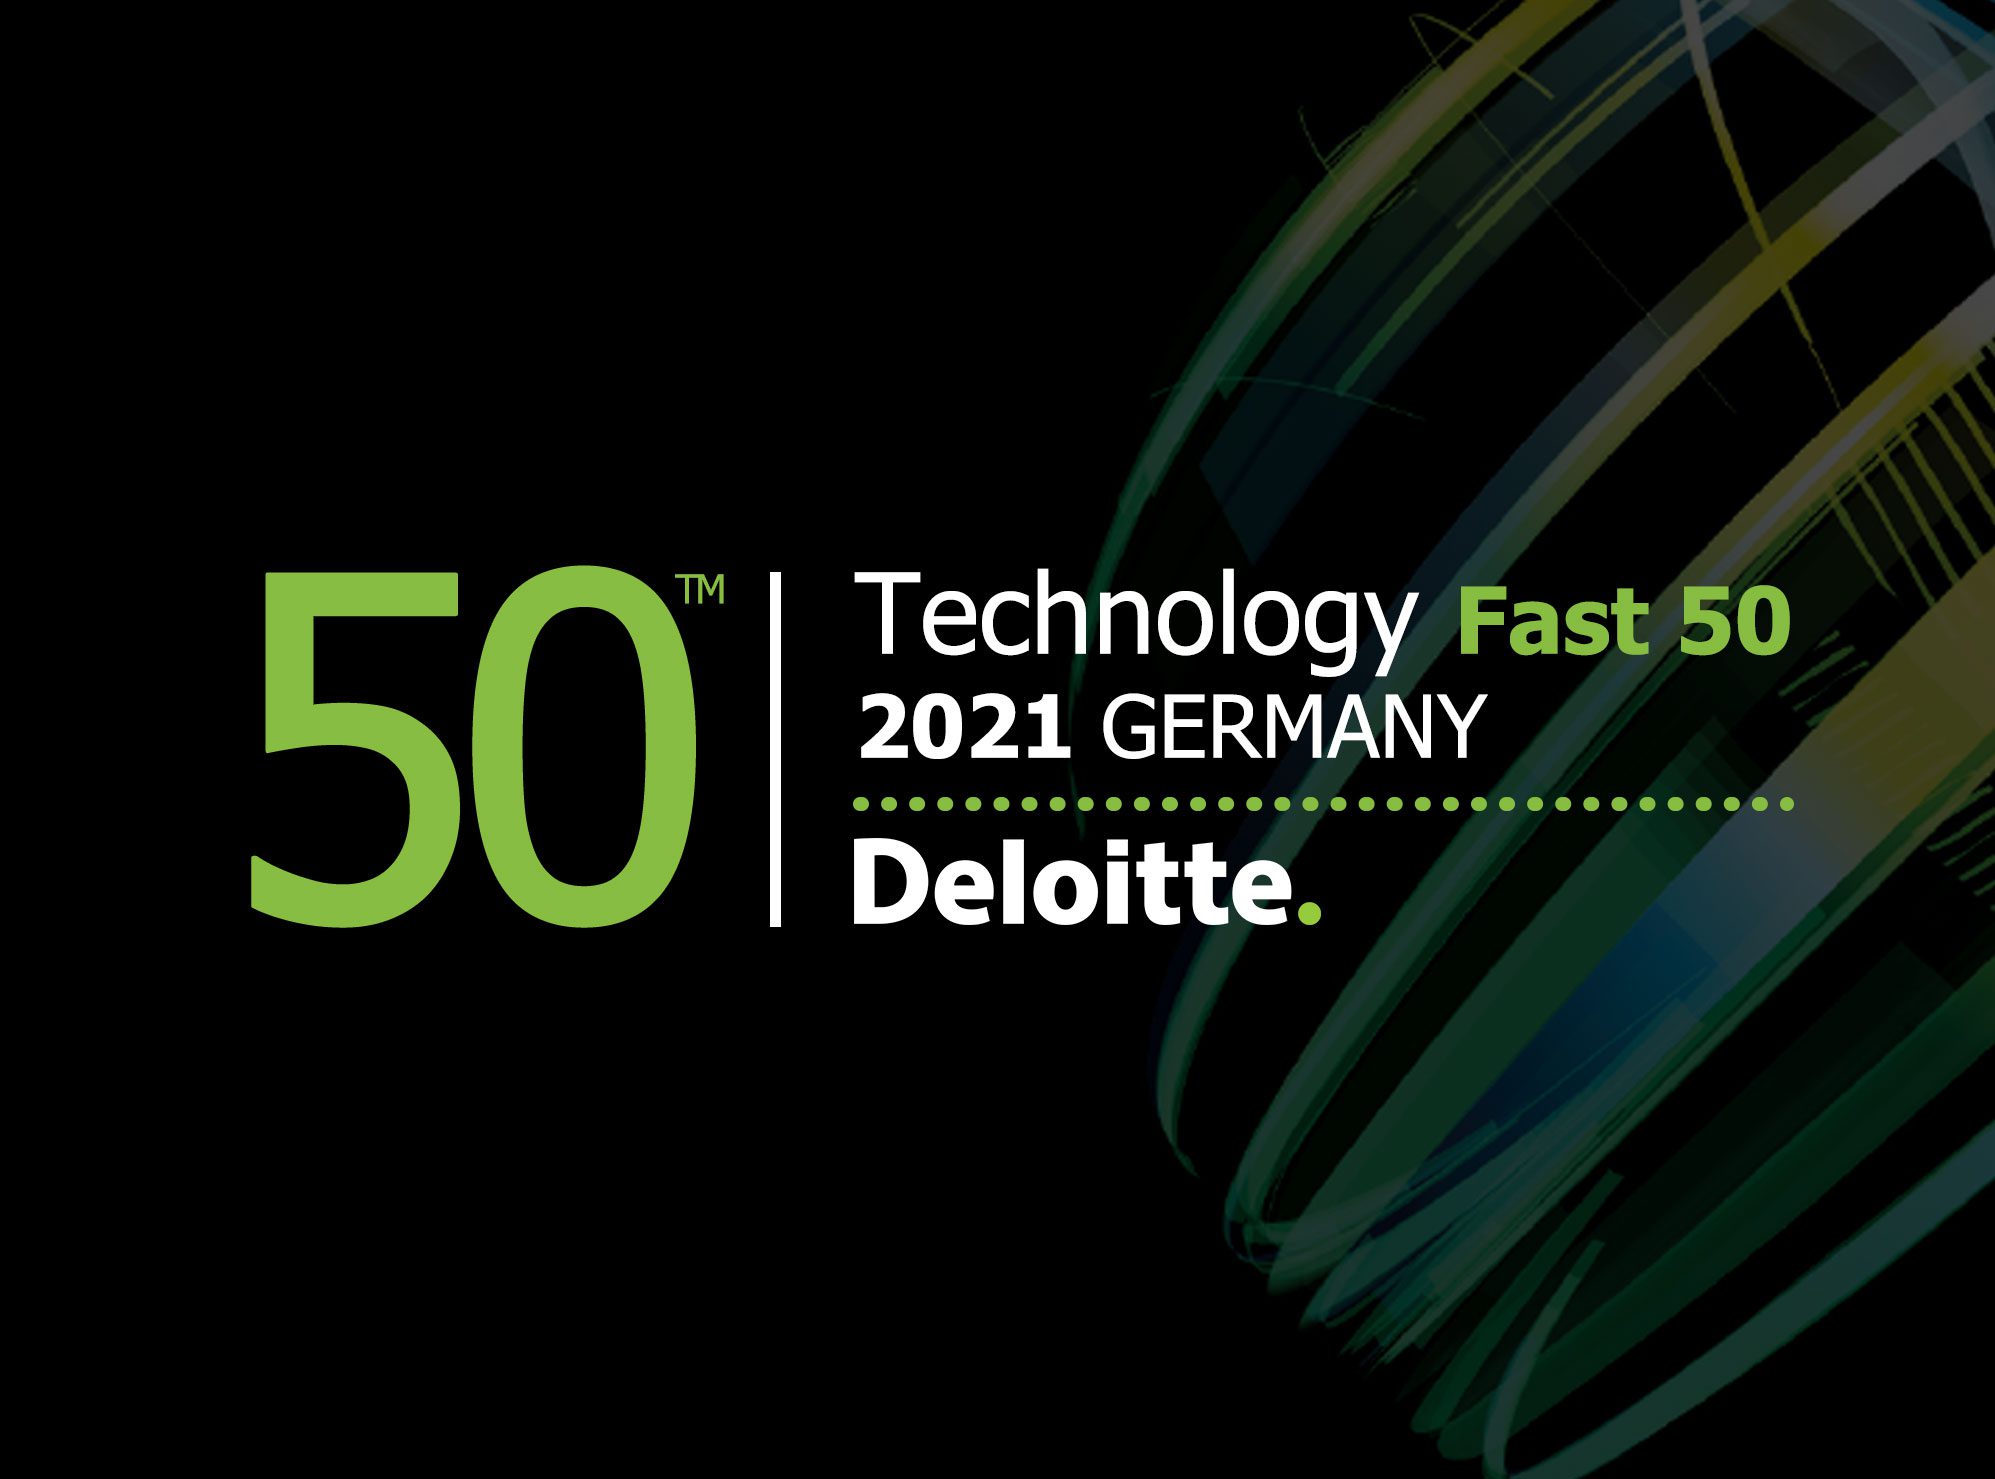 DELOITTE RECOGNISES ROBOYO AS GROWTH CHAMPION OF THE GERMAN TECH INDUSTRY